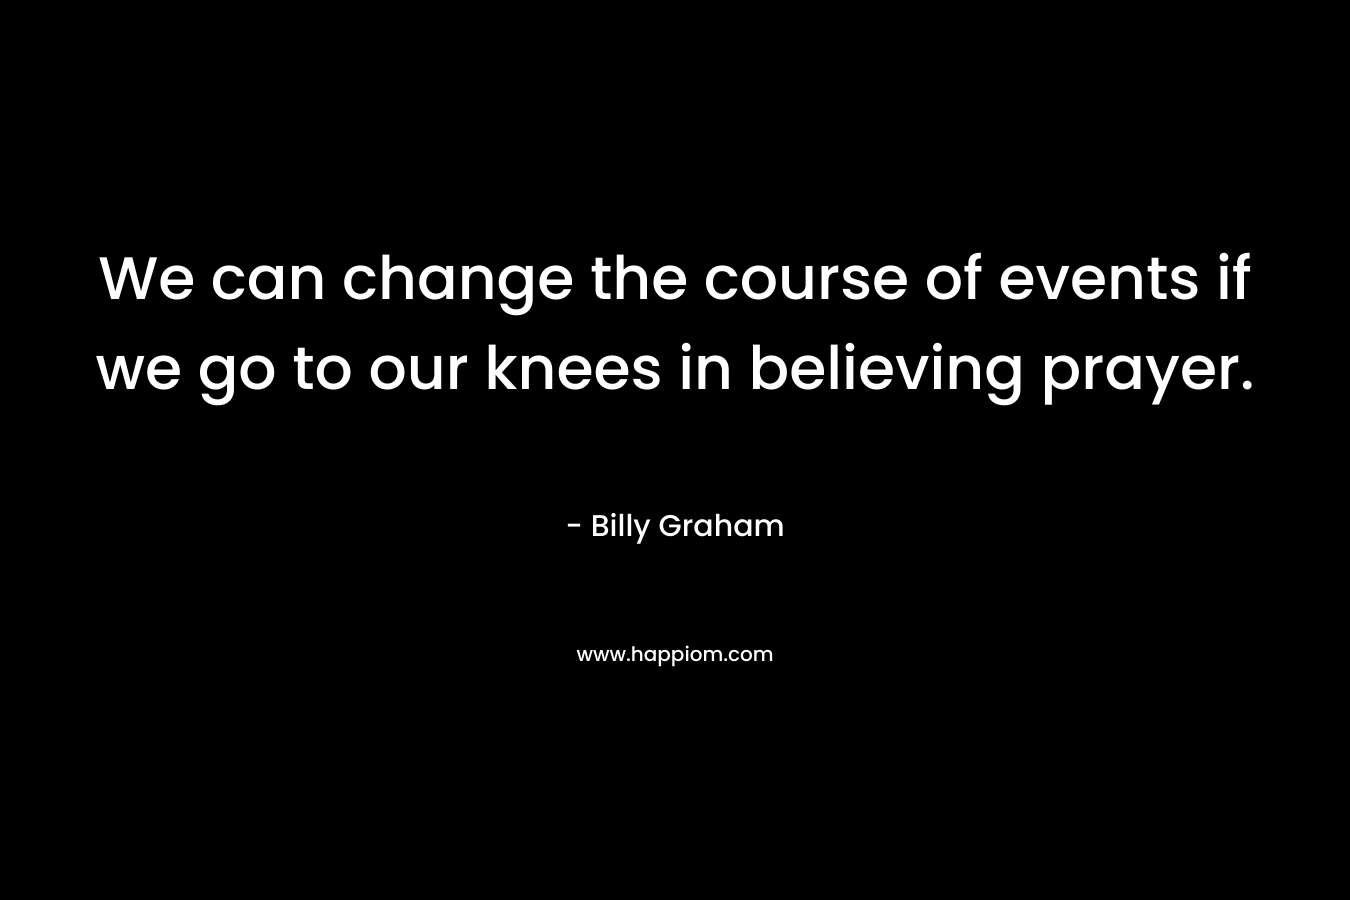 We can change the course of events if we go to our knees in believing prayer.